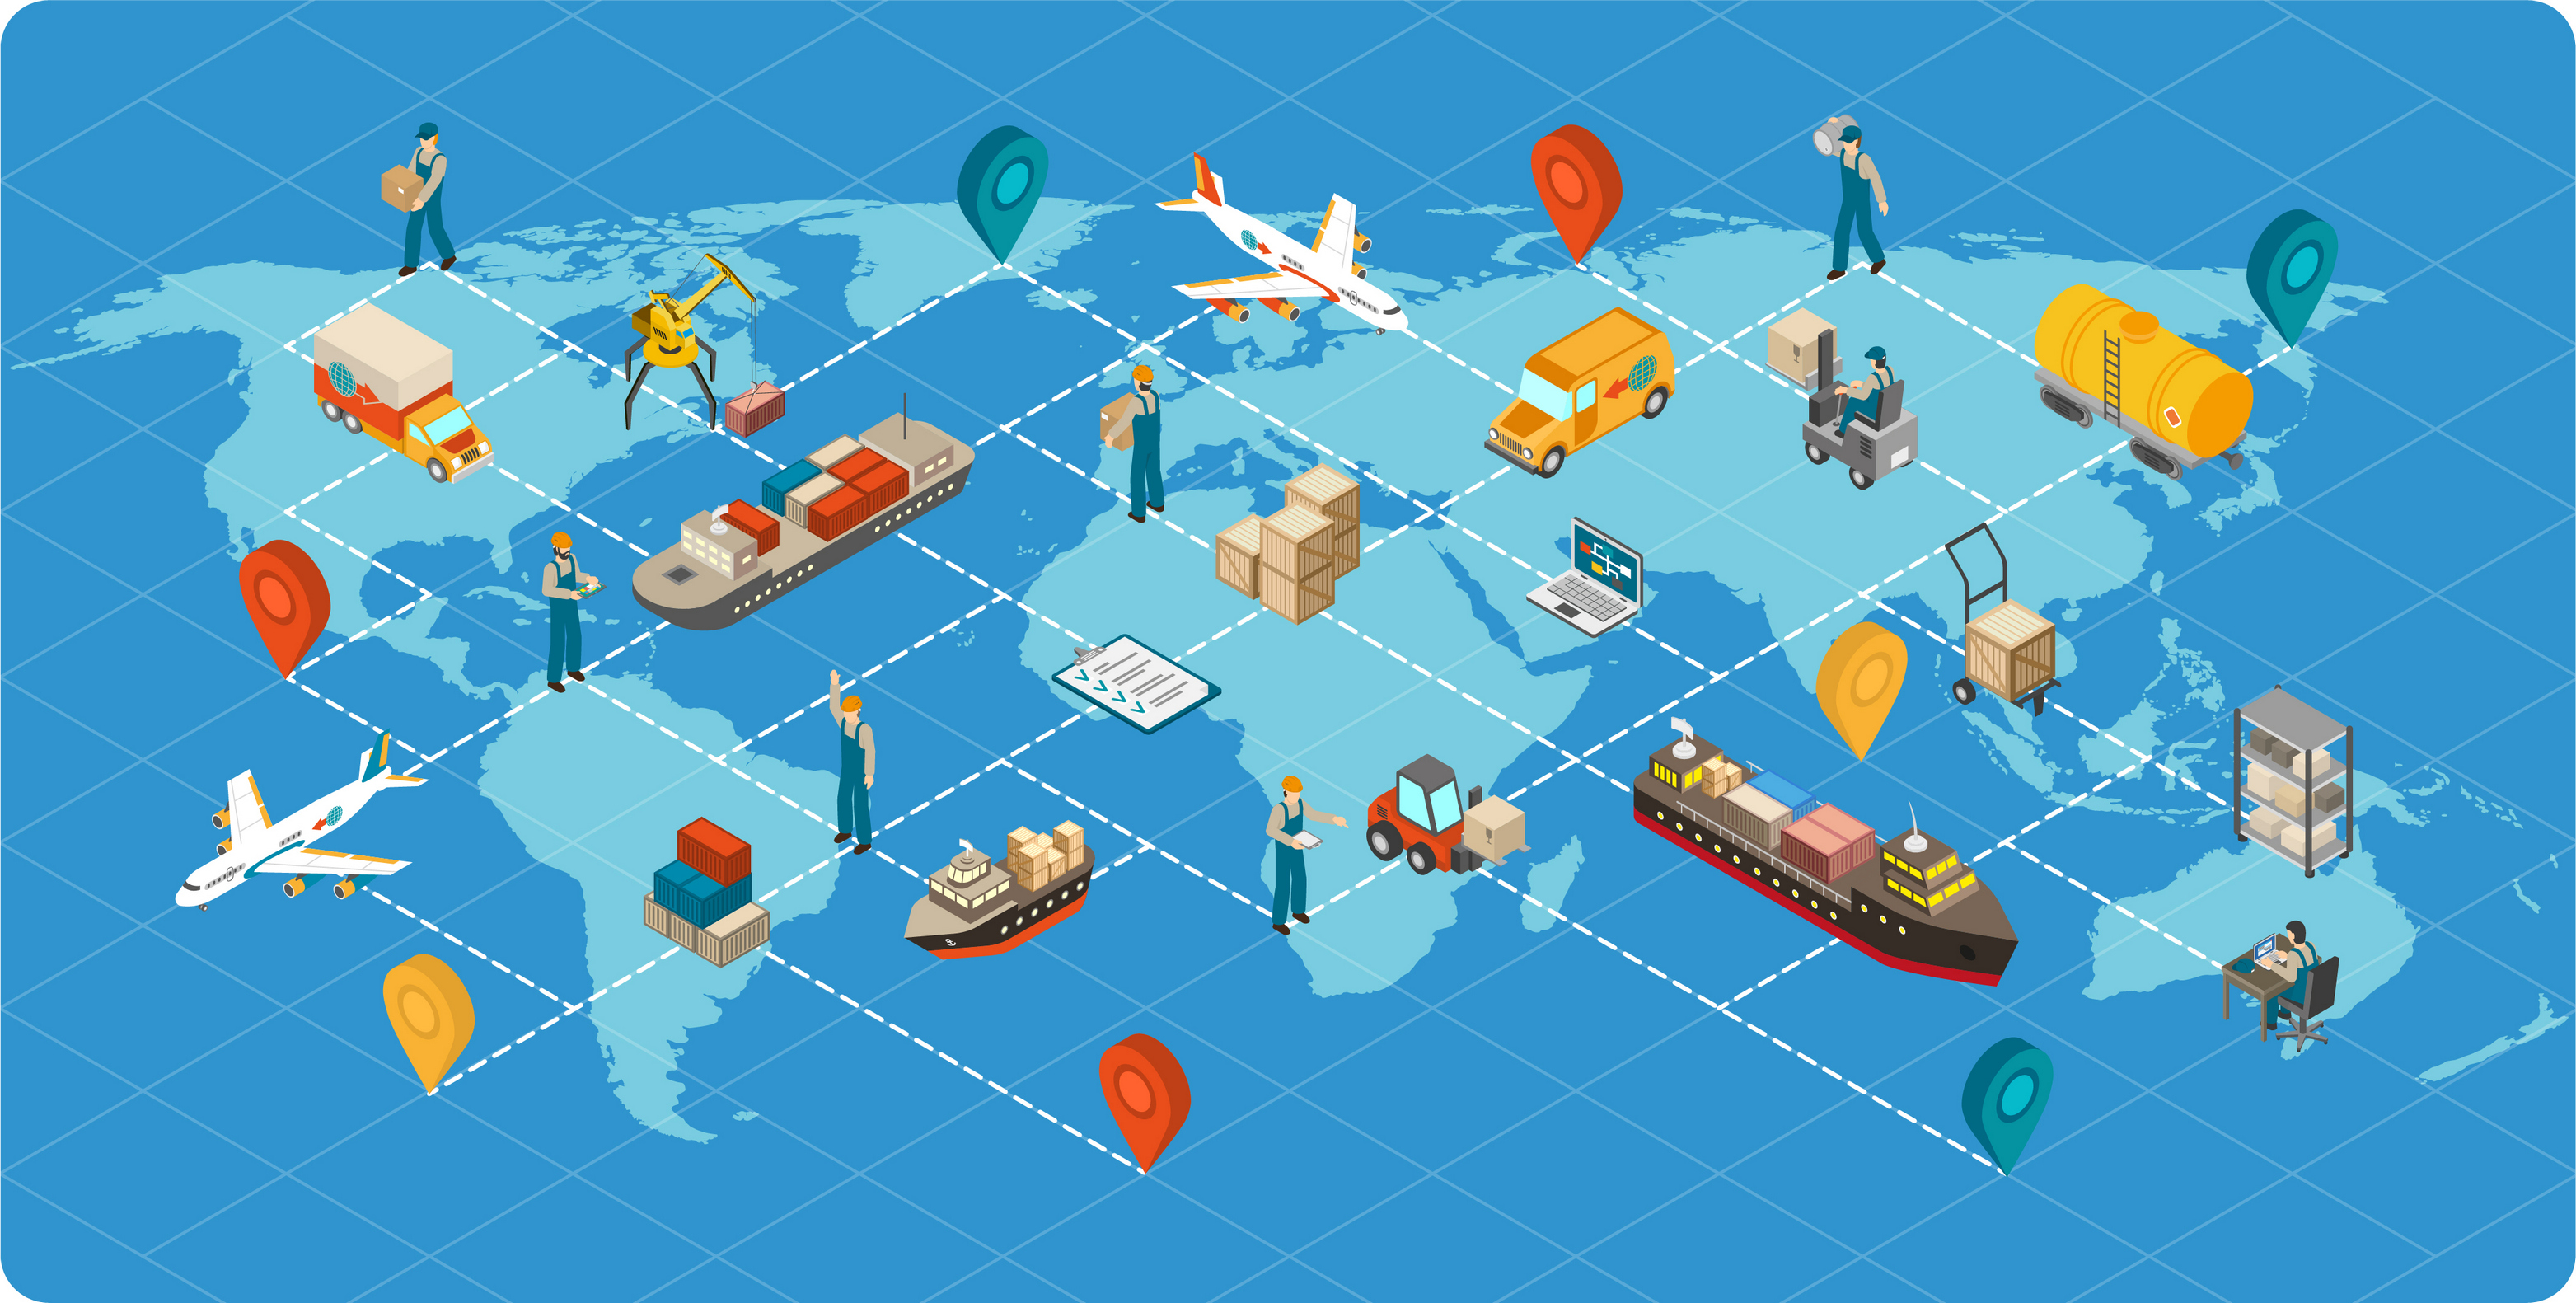 Internet of Things in Logistics